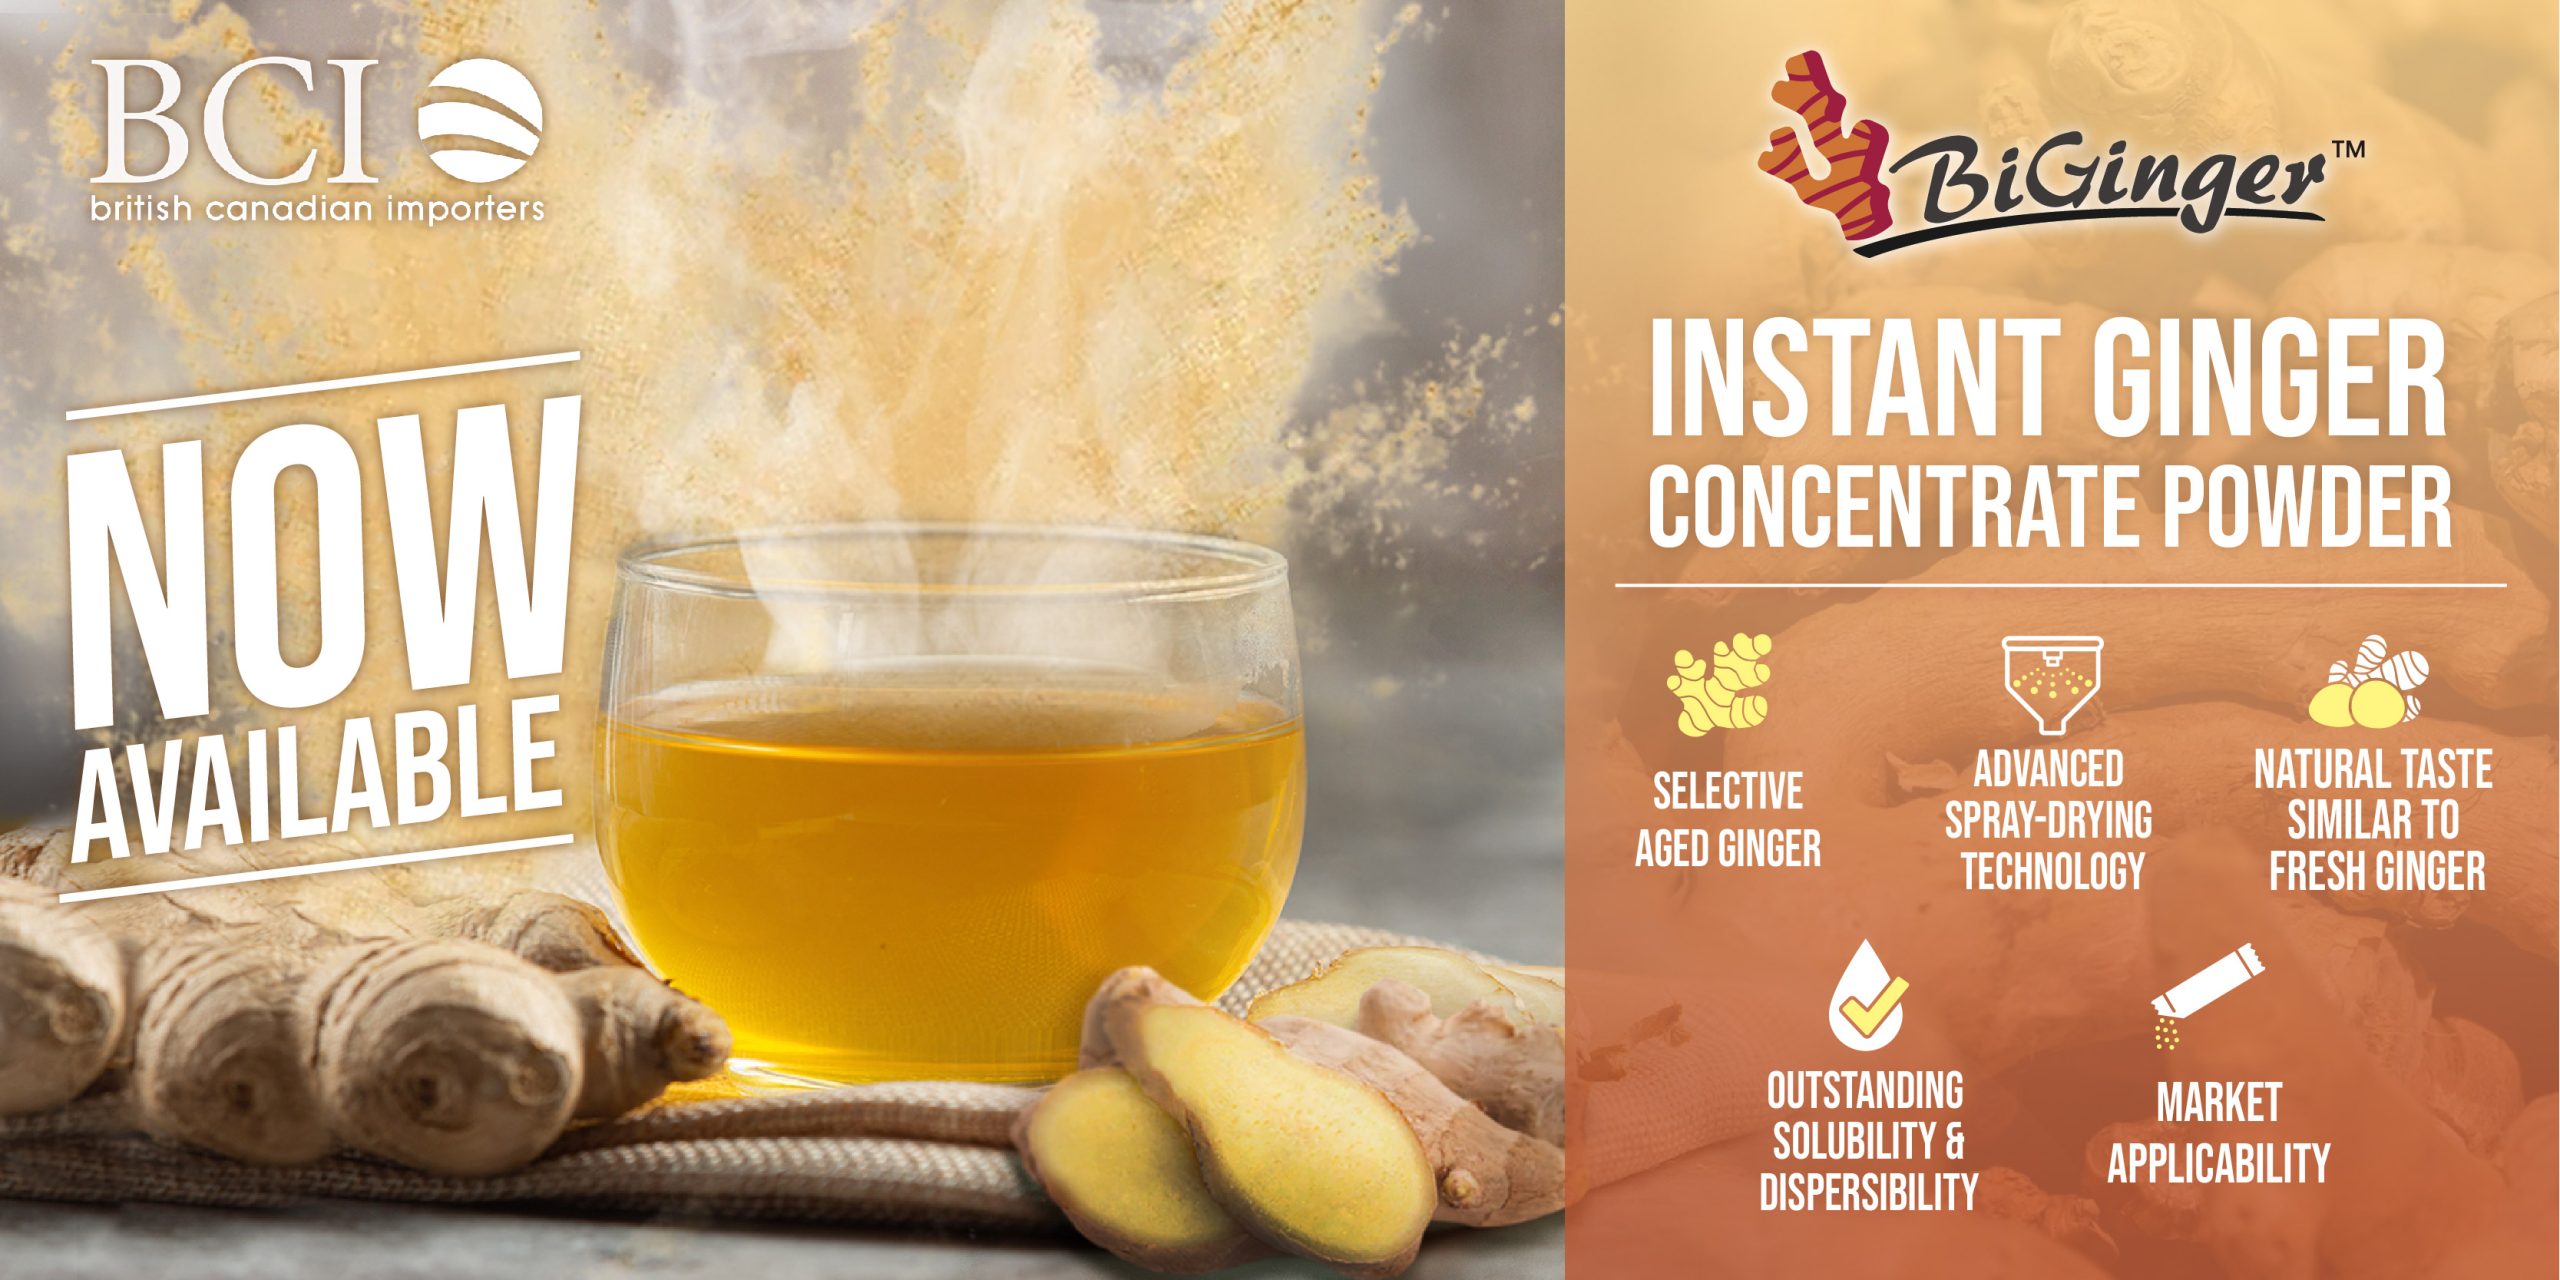 The Amazing and Mighty Ginger, is now in the Instant Concentrate Powder Form!